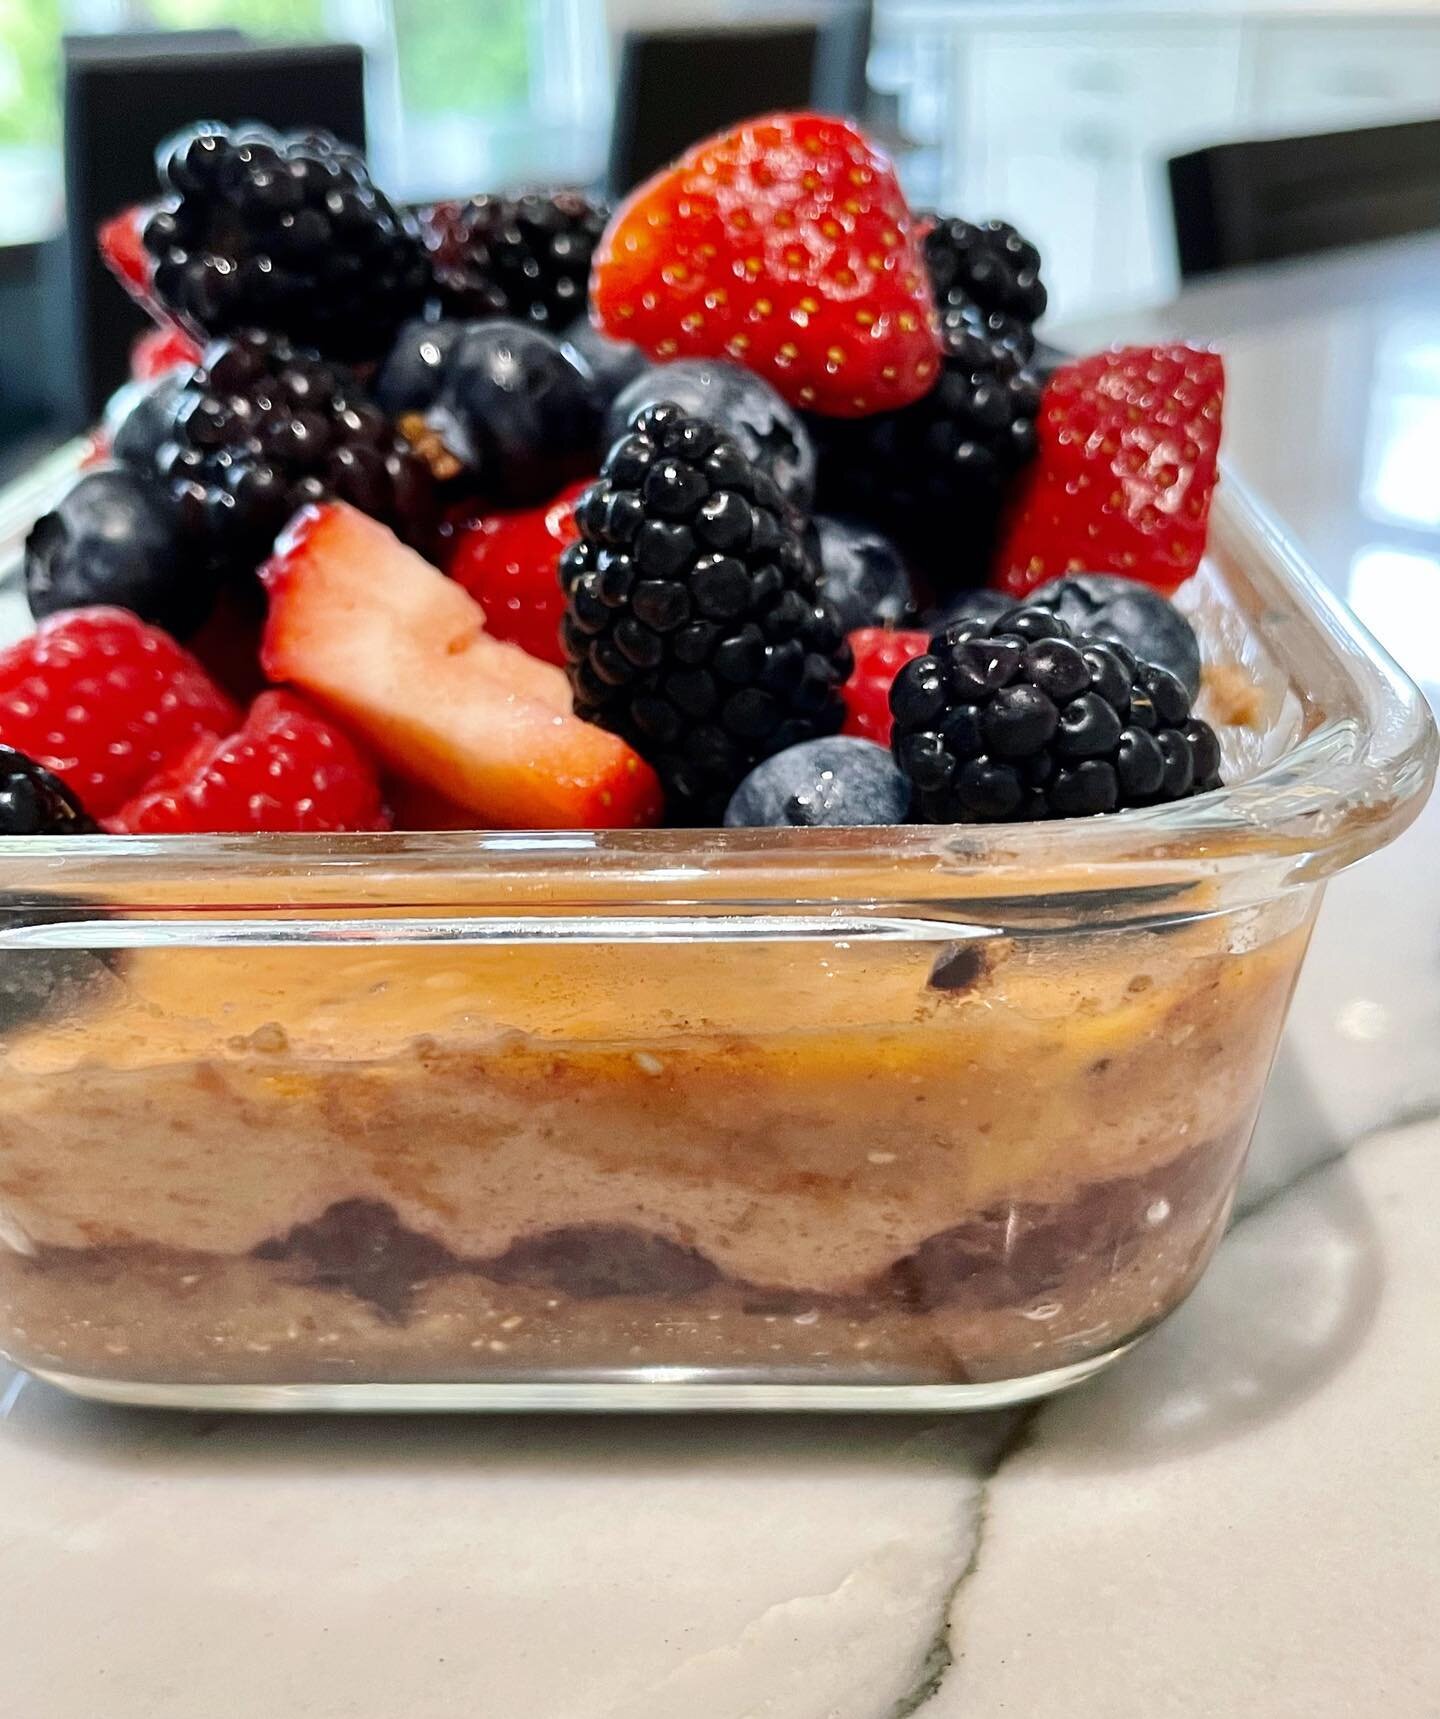 CHOCOLATE CARAMEL PB&amp;J &ldquo;CHEESECAKE&rdquo; 
⠀⠀⠀⠀⠀⠀⠀⠀⠀
(gf, keto &amp; RSF)
⠀⠀⠀⠀⠀⠀⠀⠀⠀
This is another low-carb version of my overnight breakfast cheesecake and it&rsquo;s definitely worth a try.  I mean CHOCOLATE CARAMEL PB&amp;J CHEESECAKE?!